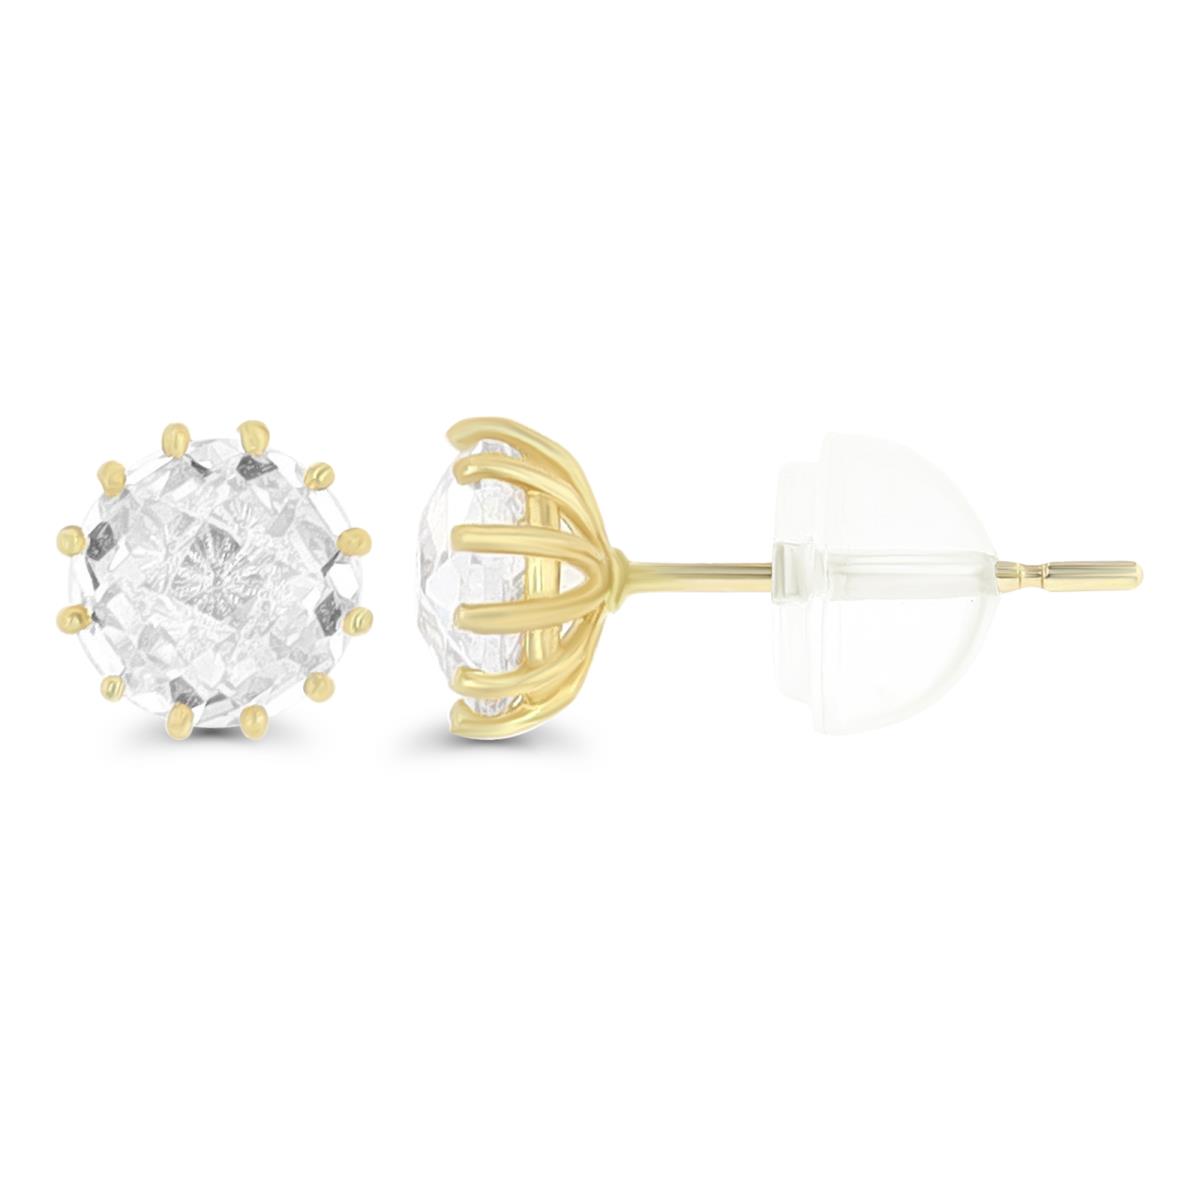 10K Yellow Gold 6mm Checkerboard Cut CZ Solitaire Stud Earring